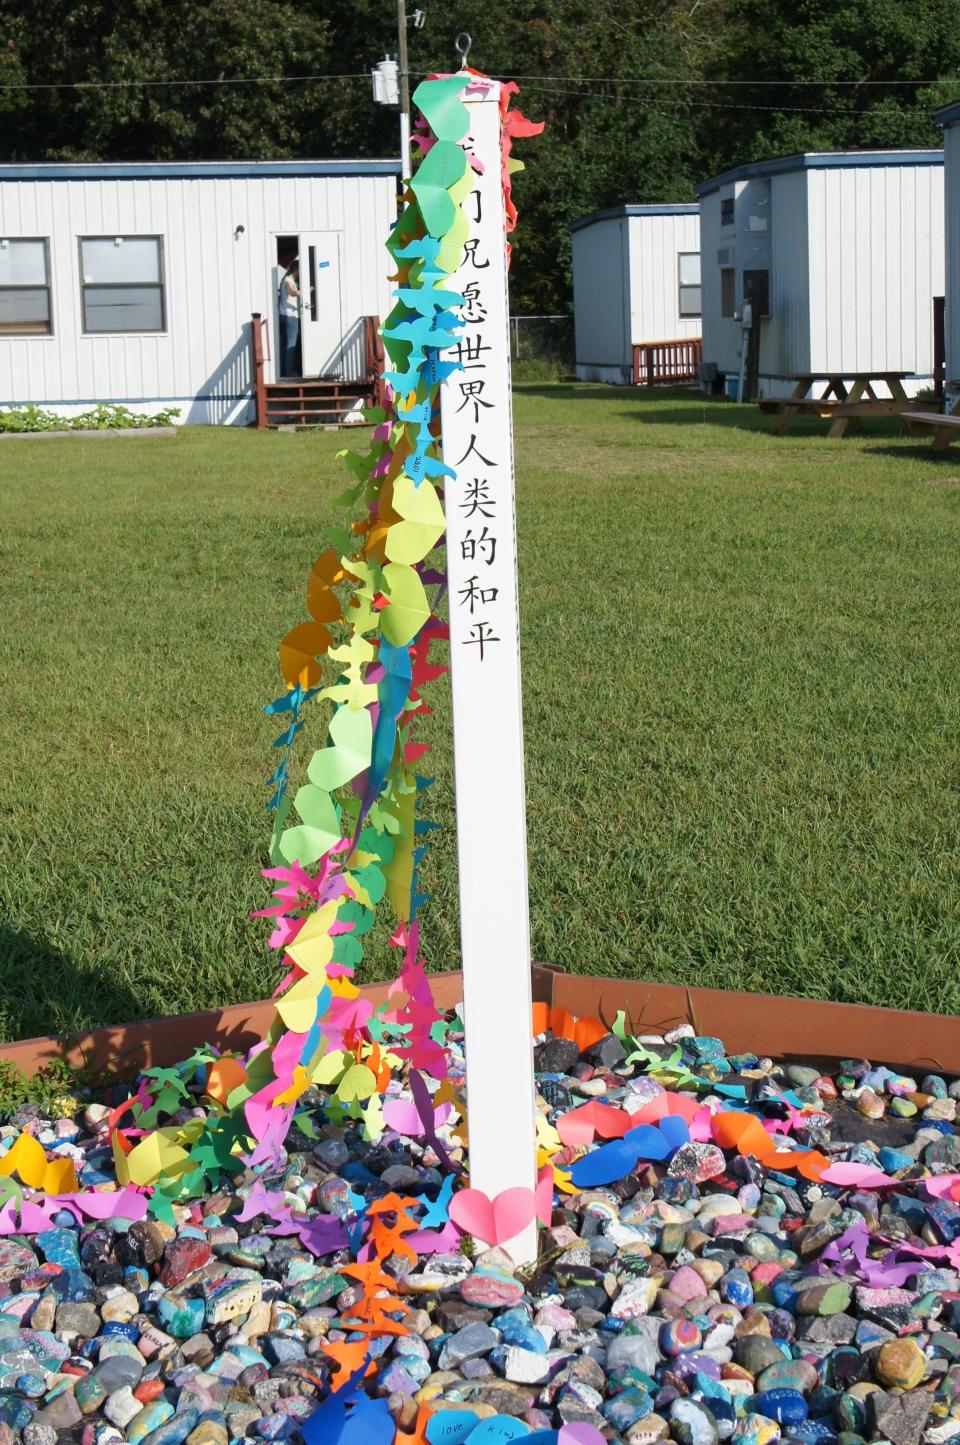 A "Peace Pole" is an iconic item on many Montessori campuses. In the background are some of the "cottages" that serve as school buildings at Coastal Empire Montessori School.